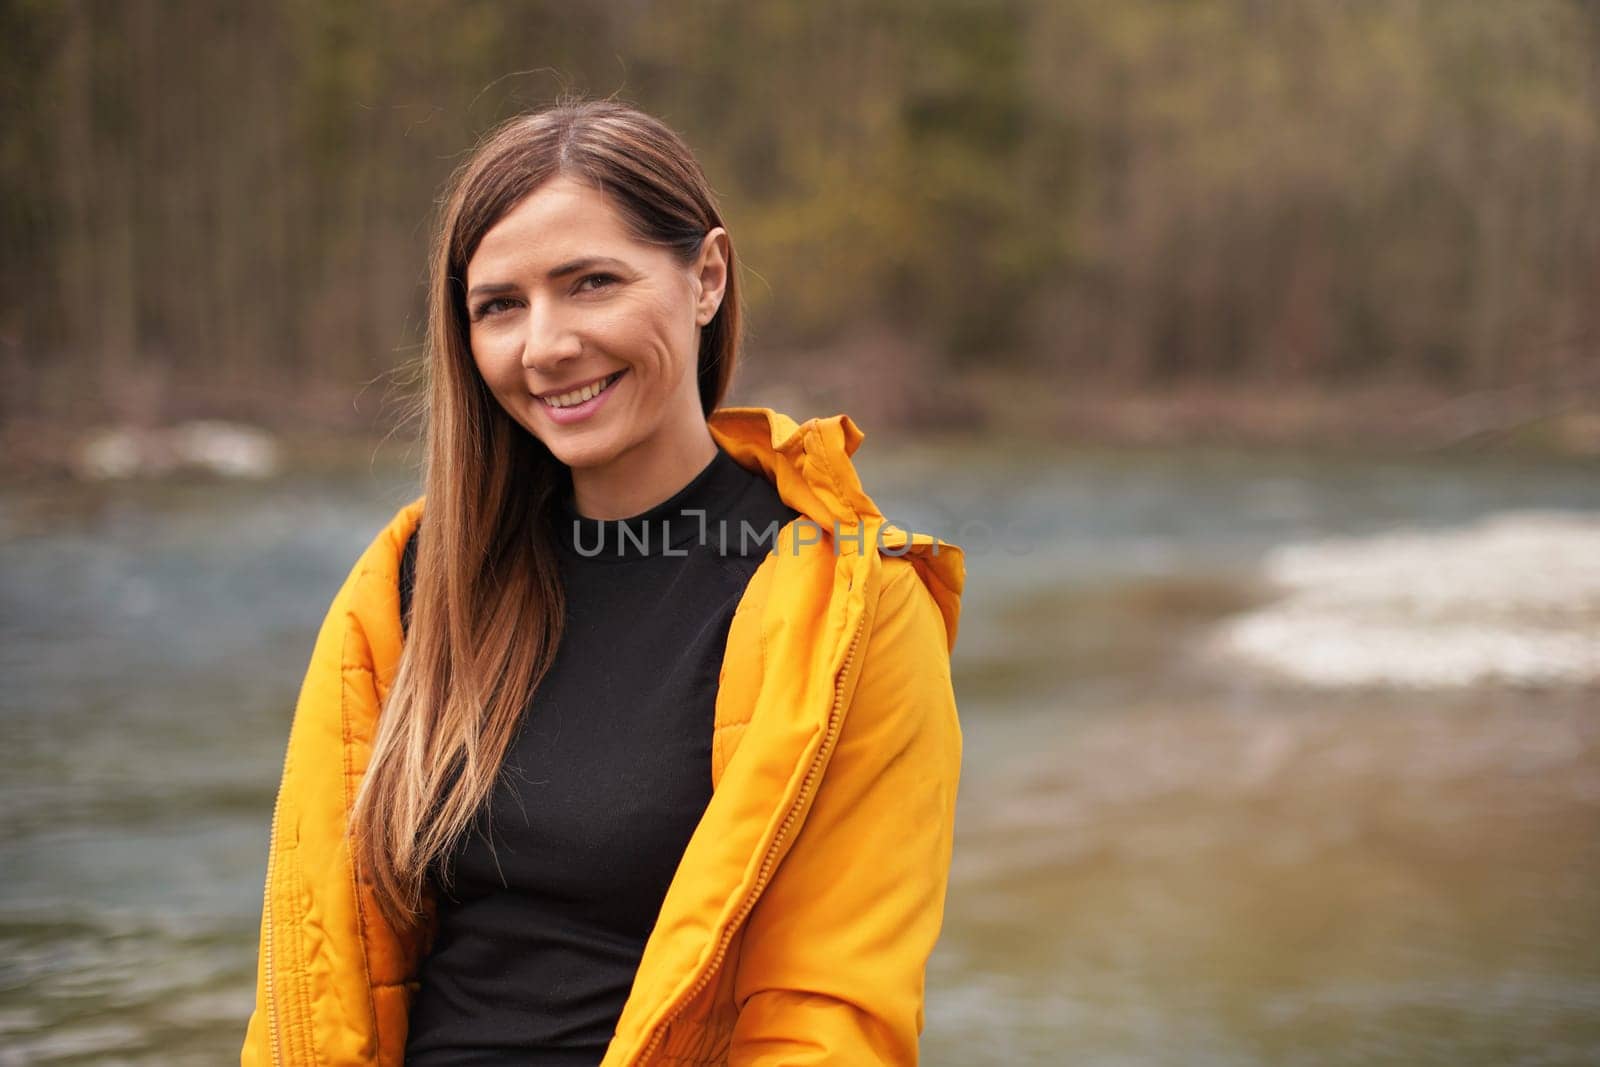 Portrait of young woman in yellow jacket, smiling, long hair down, blurred river background